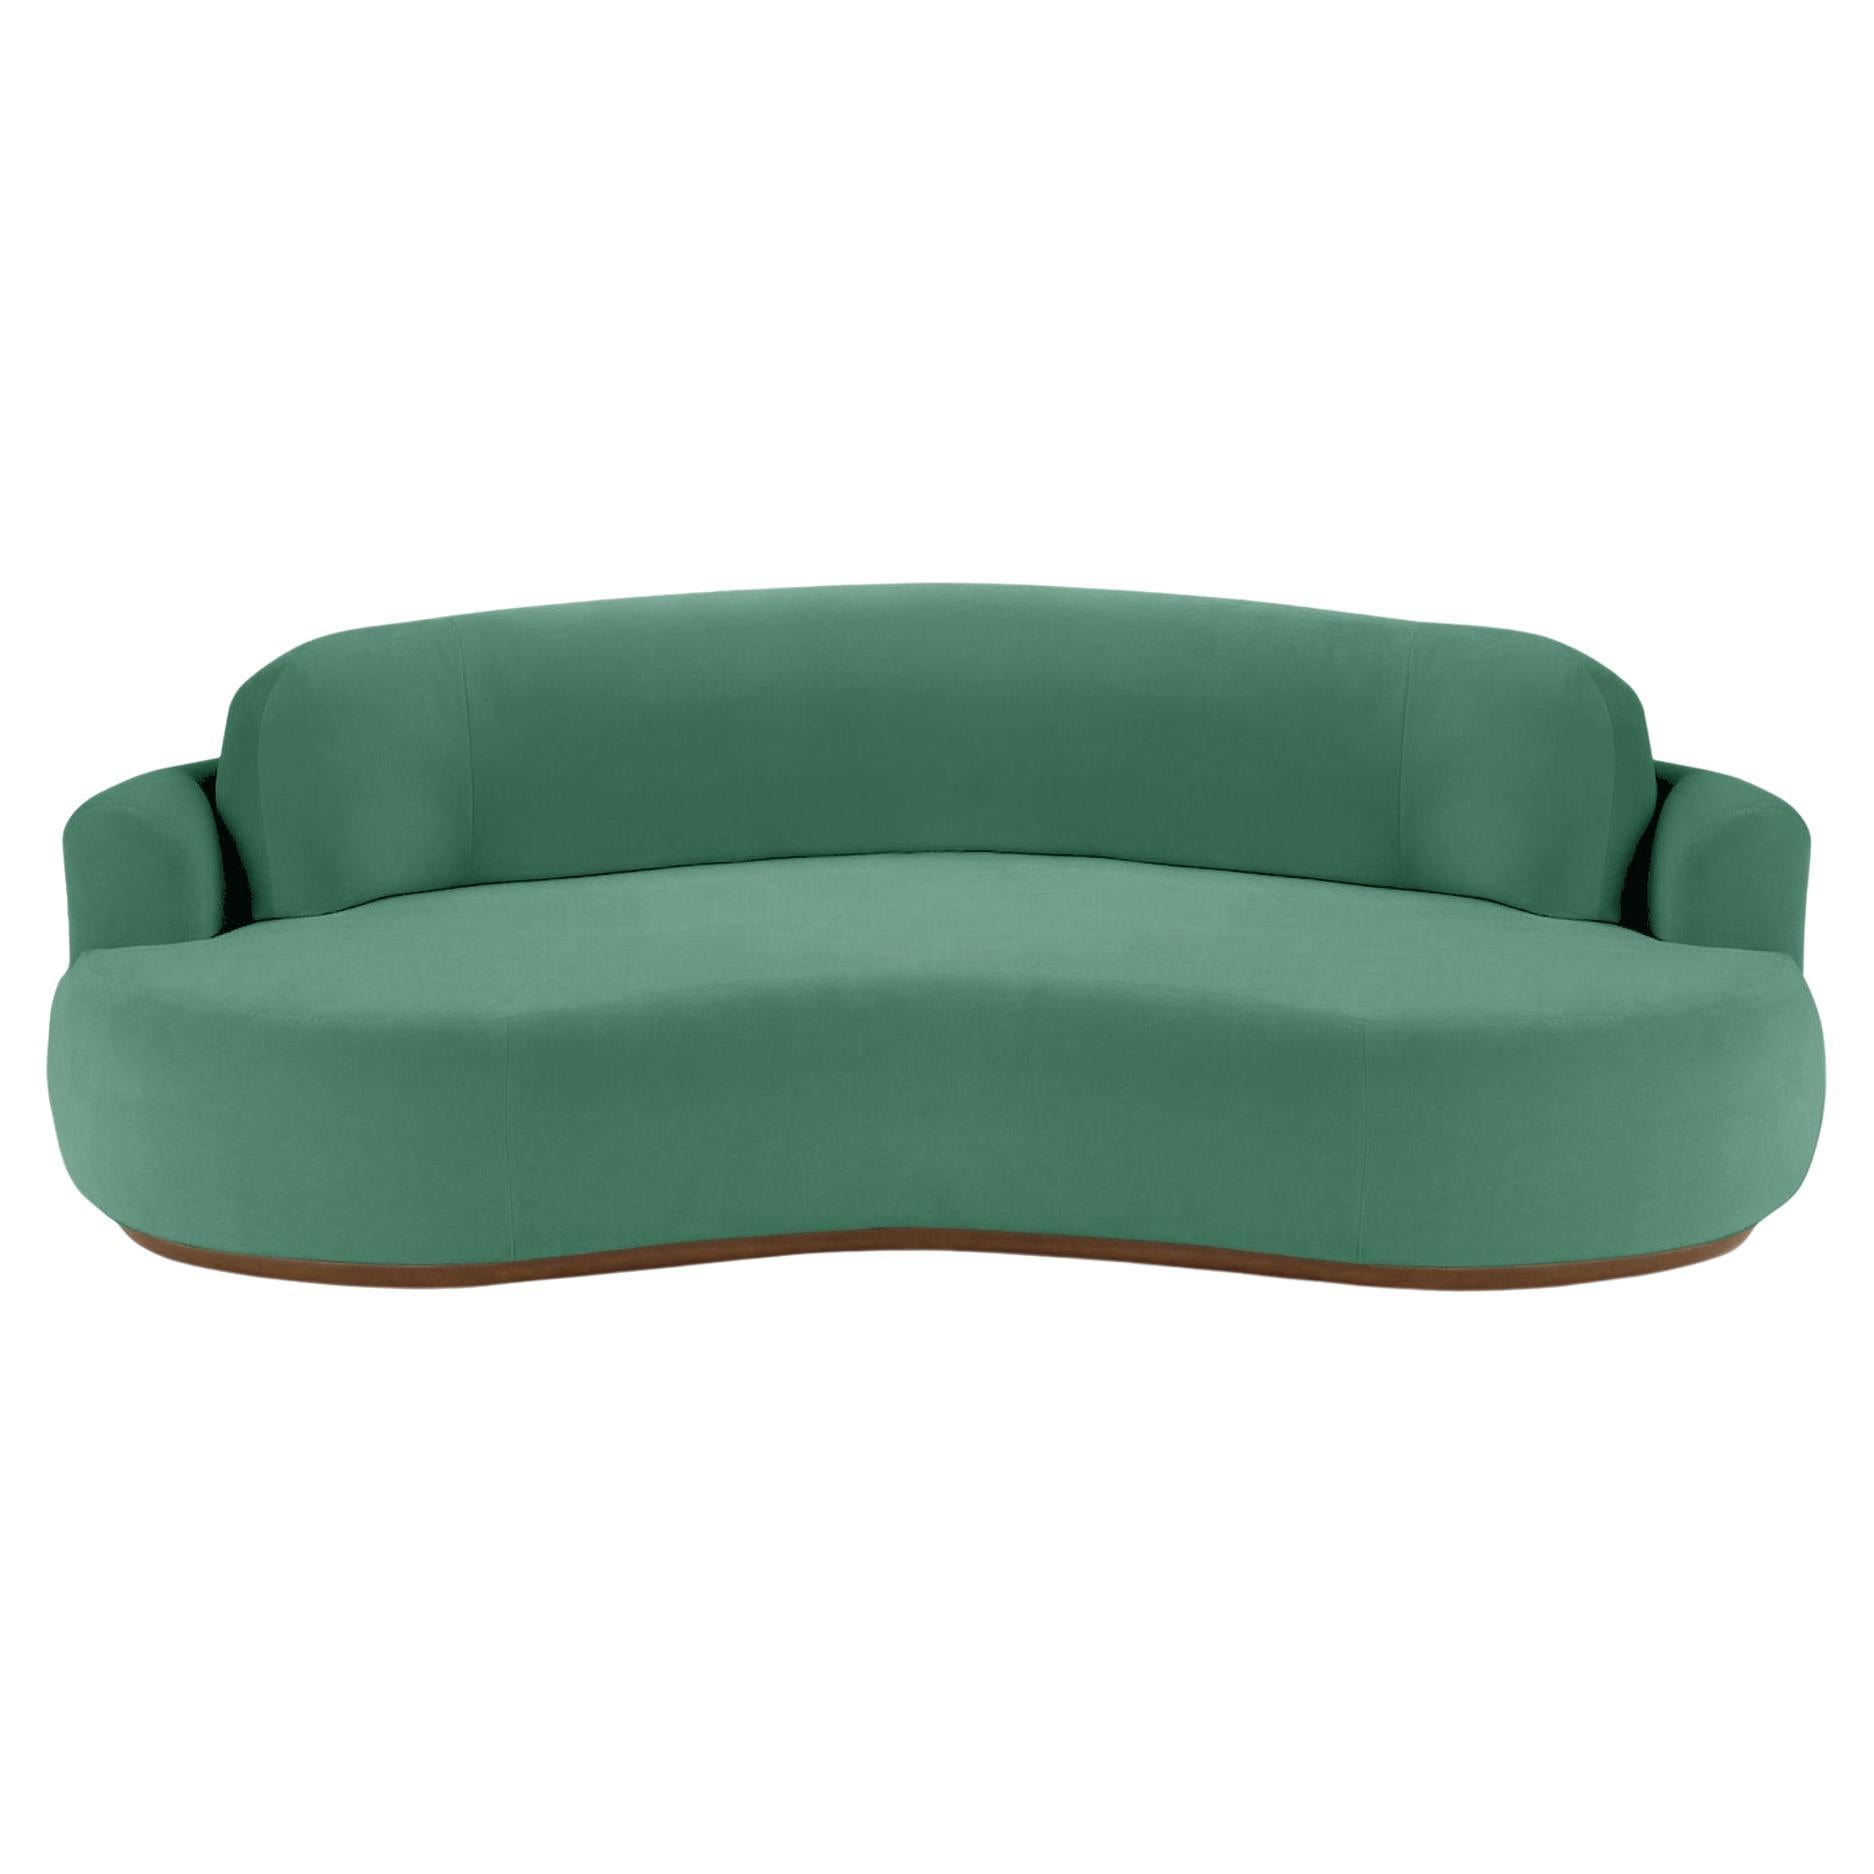 Naked Curved Sofa, Medium with Beech Ash-056-1 and Paris Green For Sale